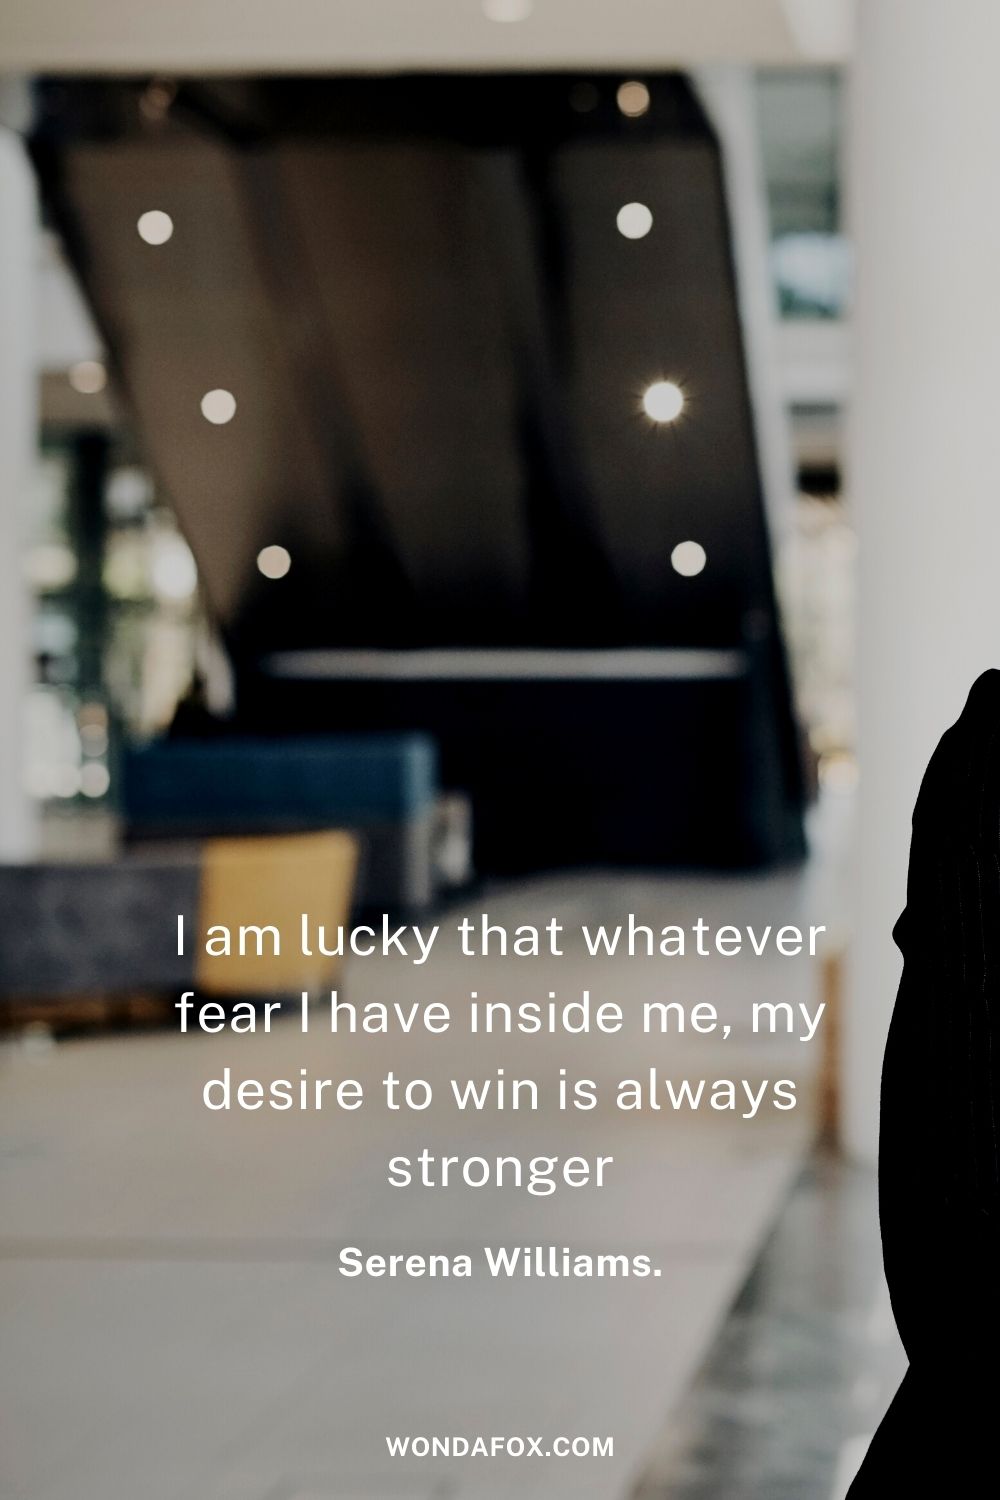 I am lucky that whatever fear I have inside me, my desire to win is always stronger